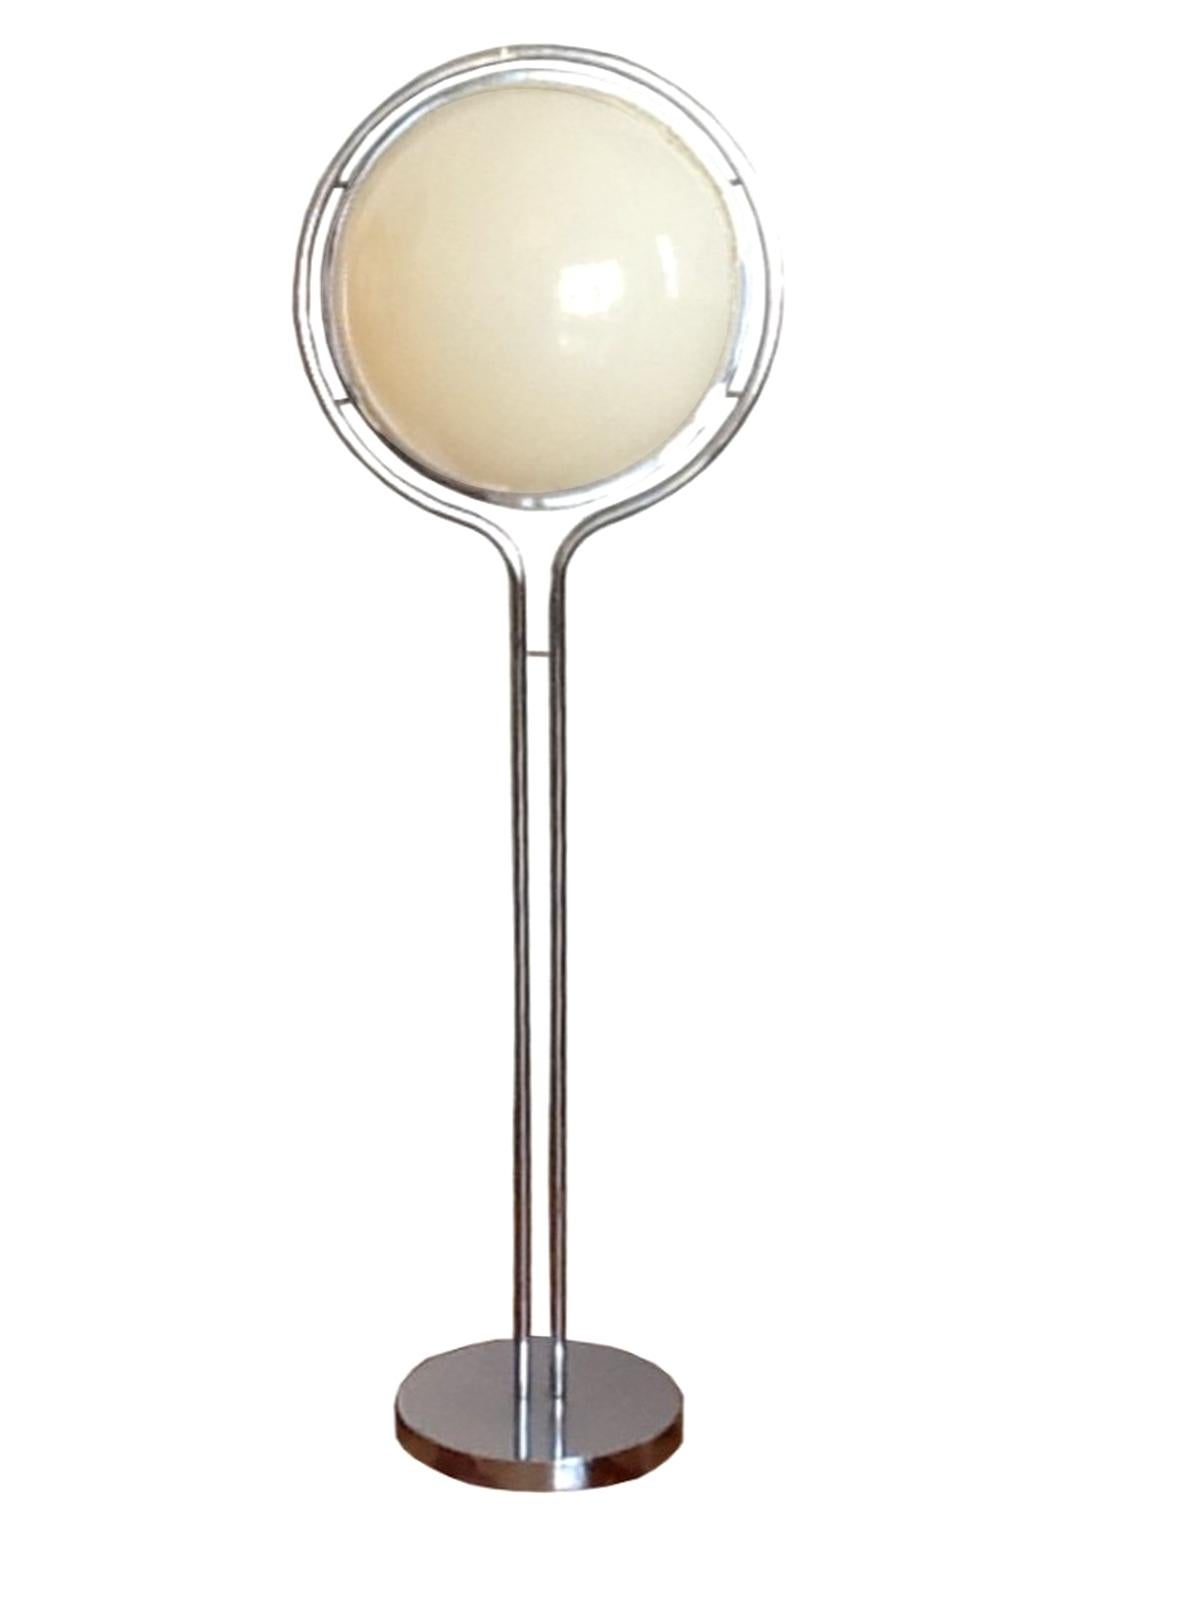 Pair of floor lamps by Jean-Pierre Garrault and Henri Delord, edited by Chabrieres in 1971.
In chromed metal and white plexiglas.

This floor lamp was presented by Chabrieres during prestigious exhibitions, including the 1971 